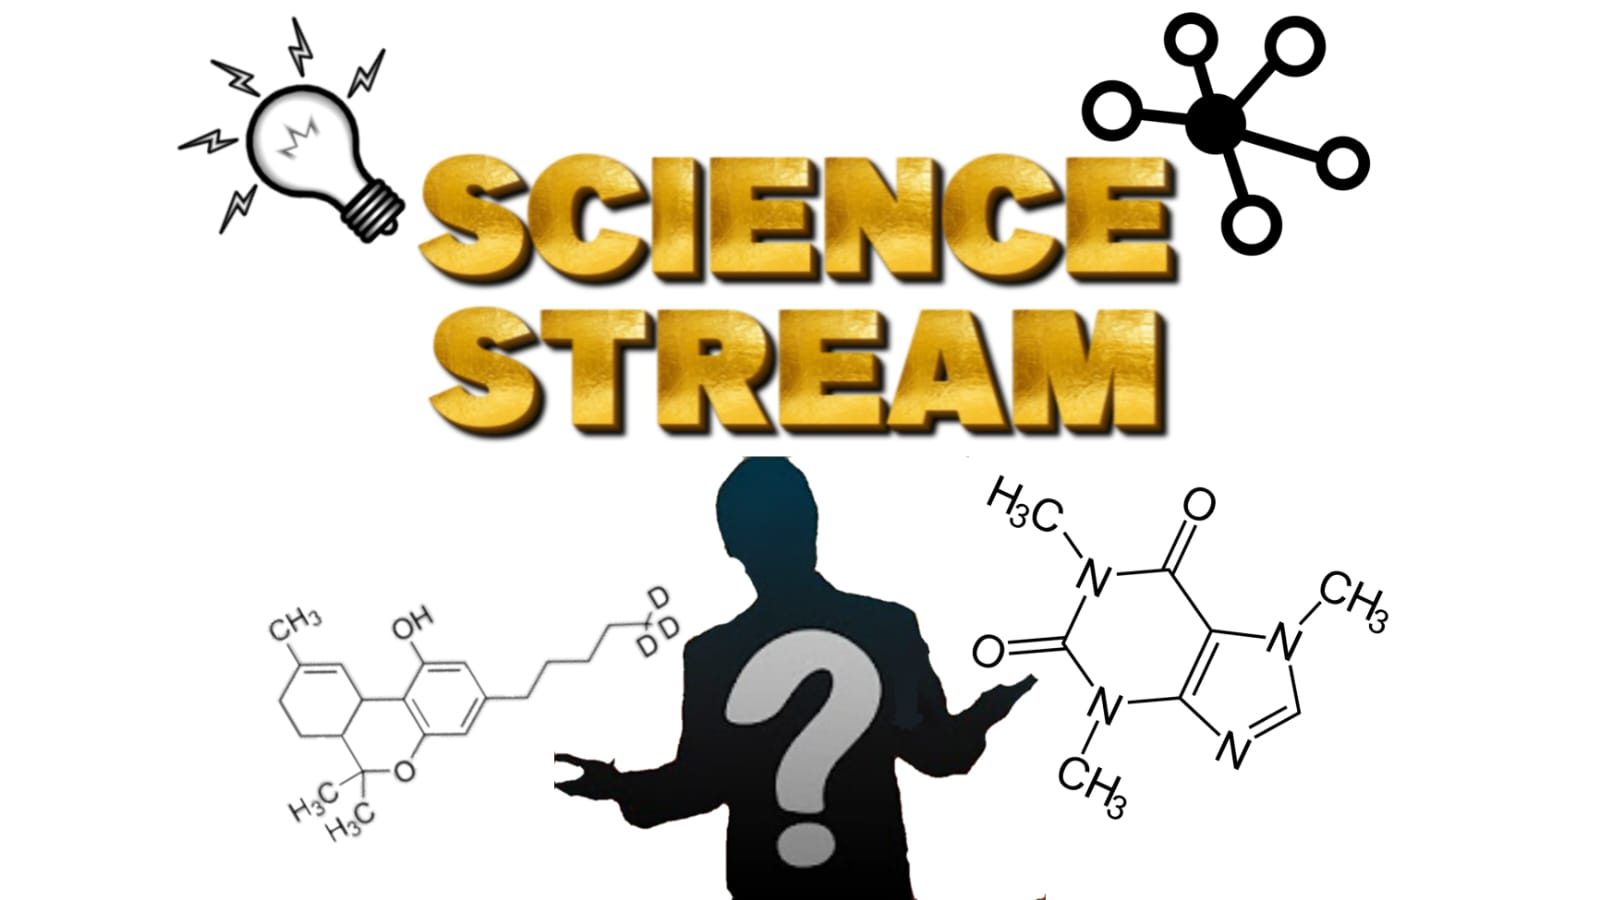 What are the subjects in the Science stream after 10th Class